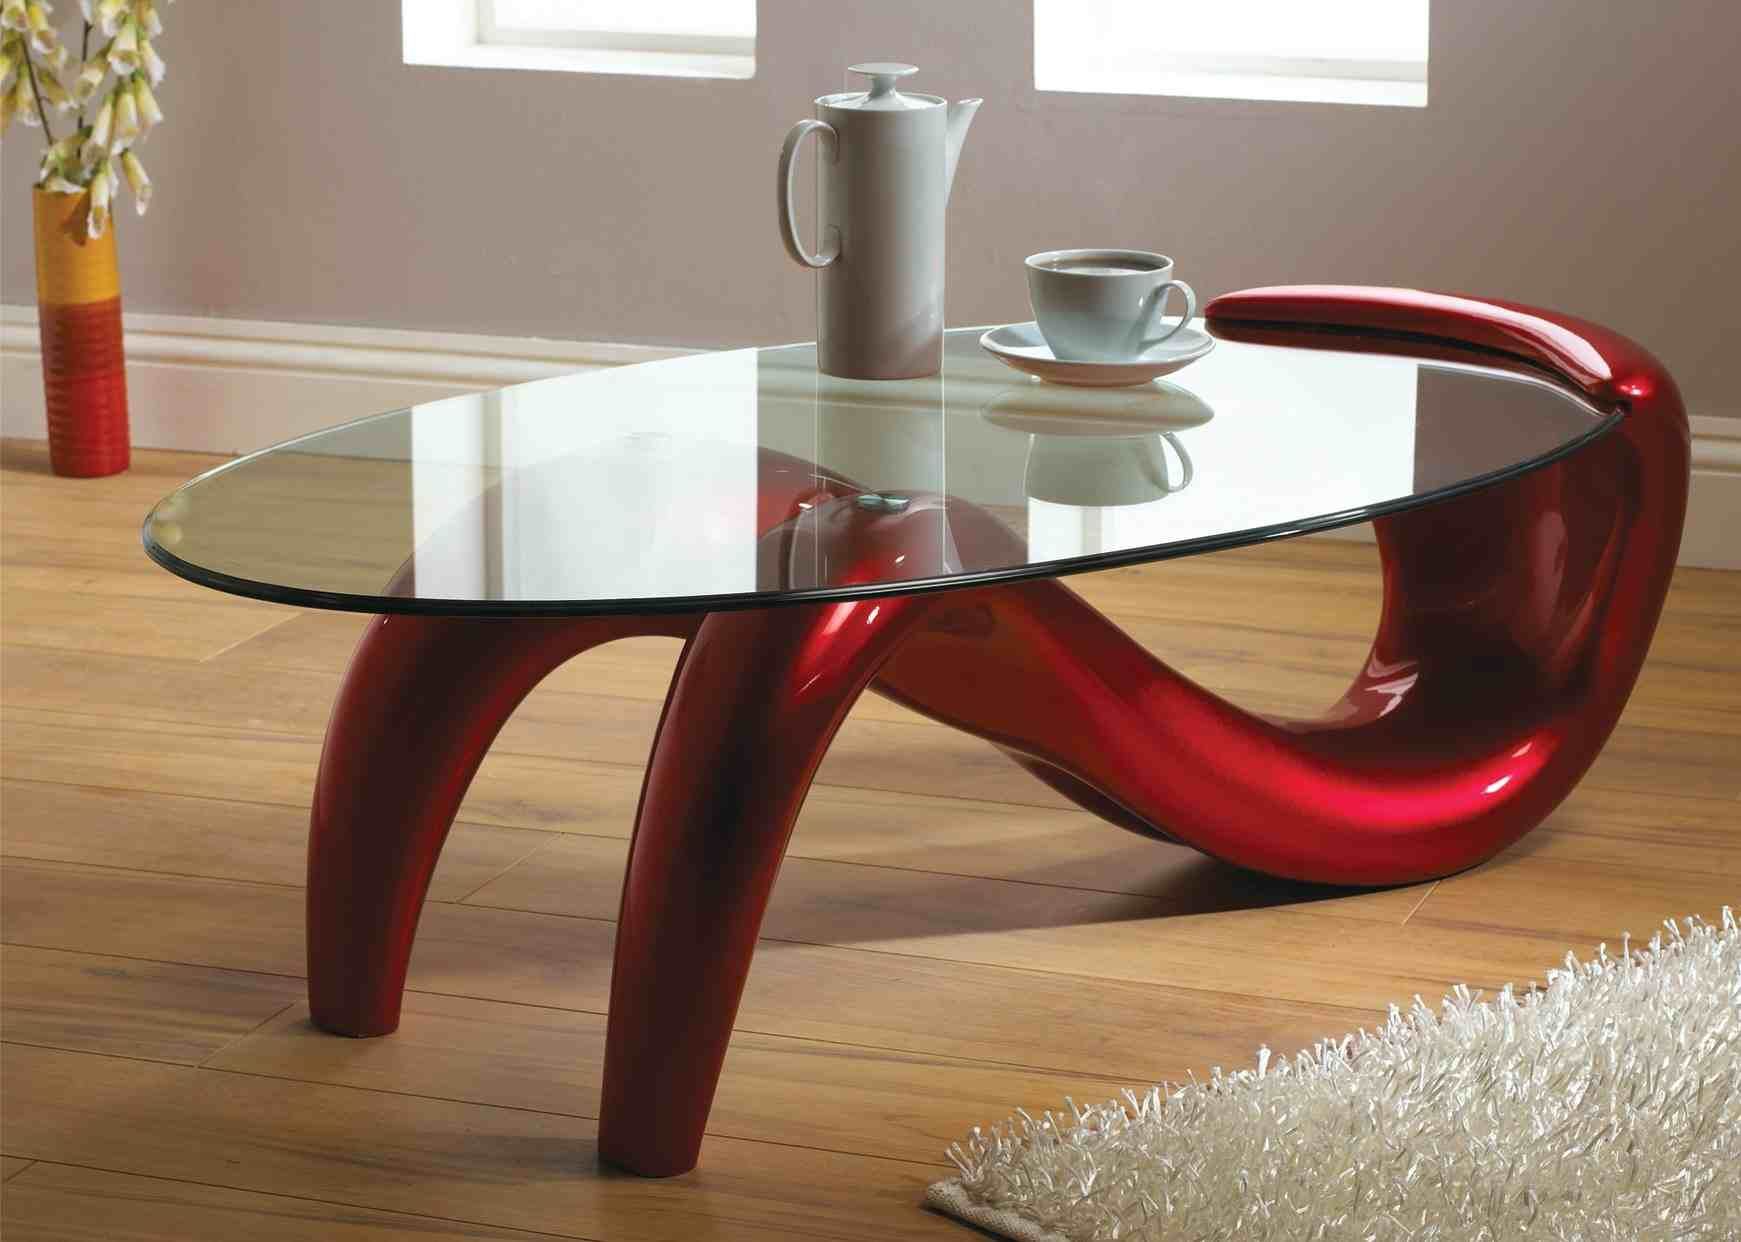 Trendy Modern Glass Coffee Table | Modern Glass Coffee Table, Modern Pertaining To Glass Coffee Tables With Lower Shelves (View 17 of 20)